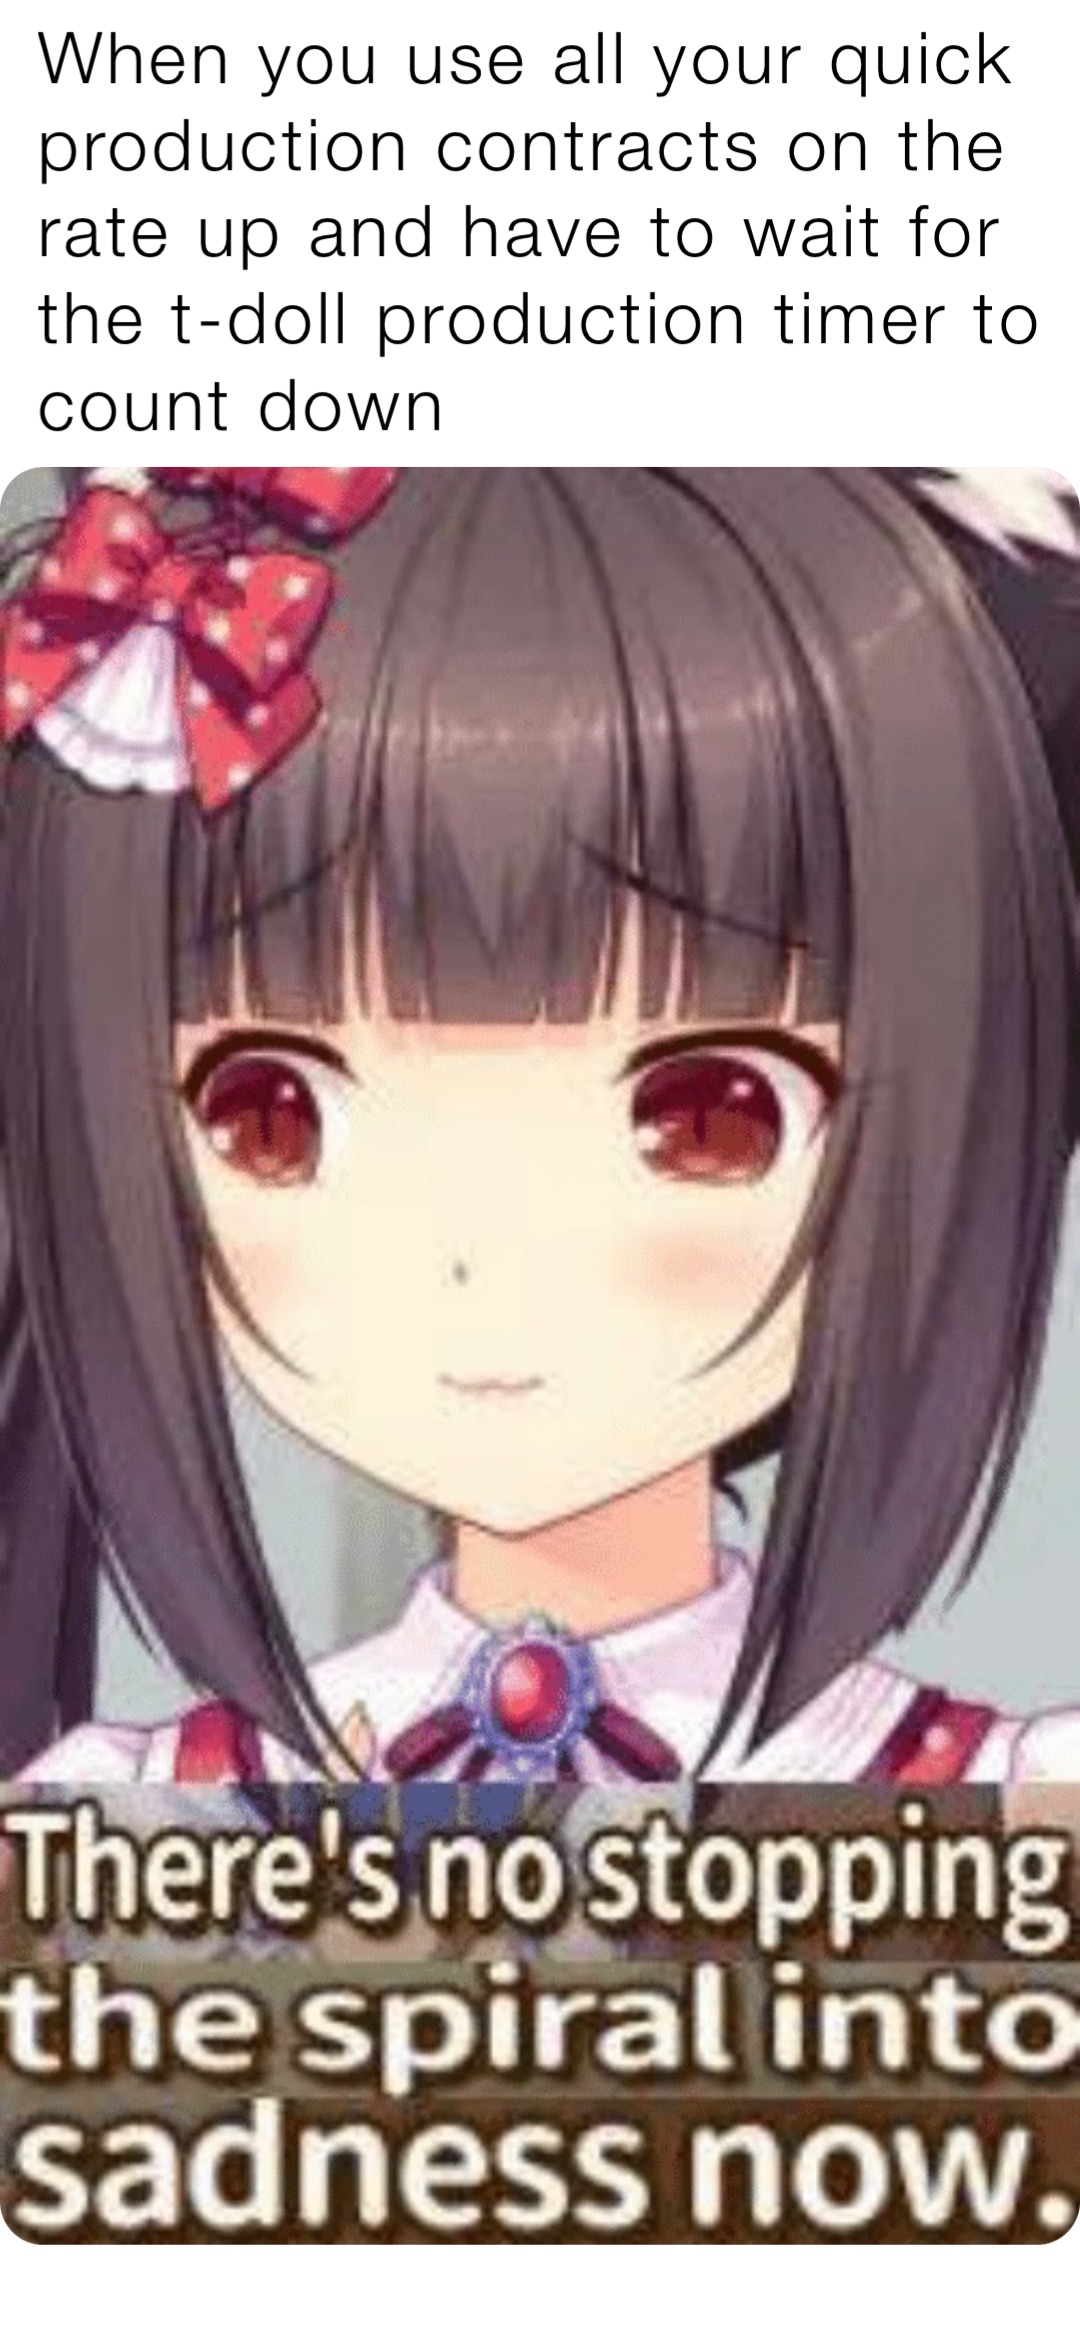 When you use all your quick production contracts on the rate up and have to wait for the t-doll production timer to count down